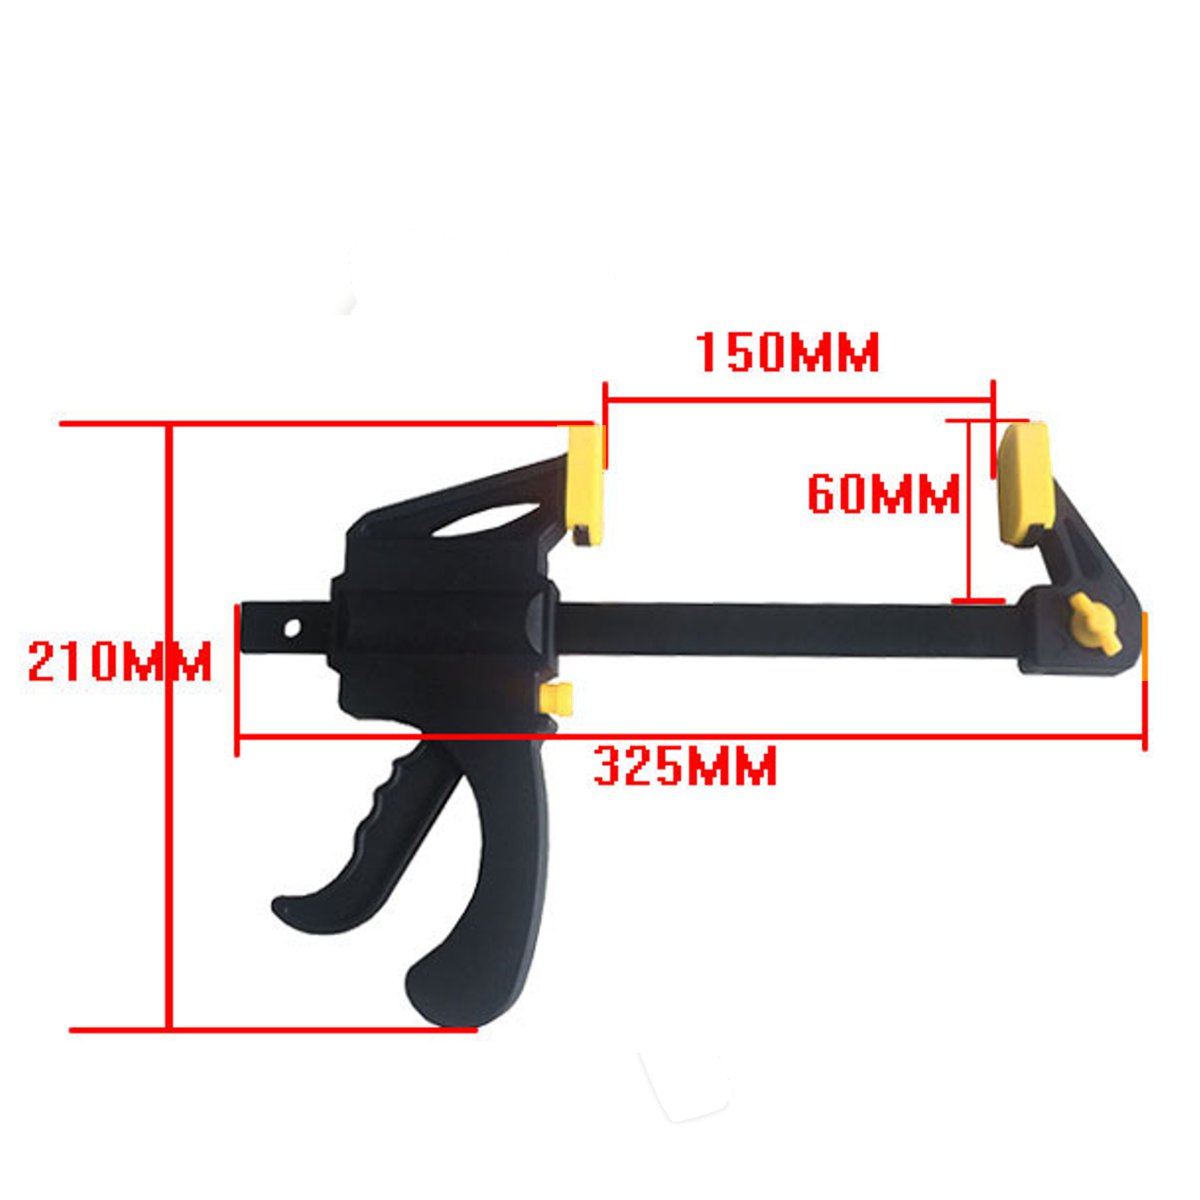 Quick-Grip-Mini-Bar-Clamp-Wood-Working-Clamp-150mm-6-Inch-1220391